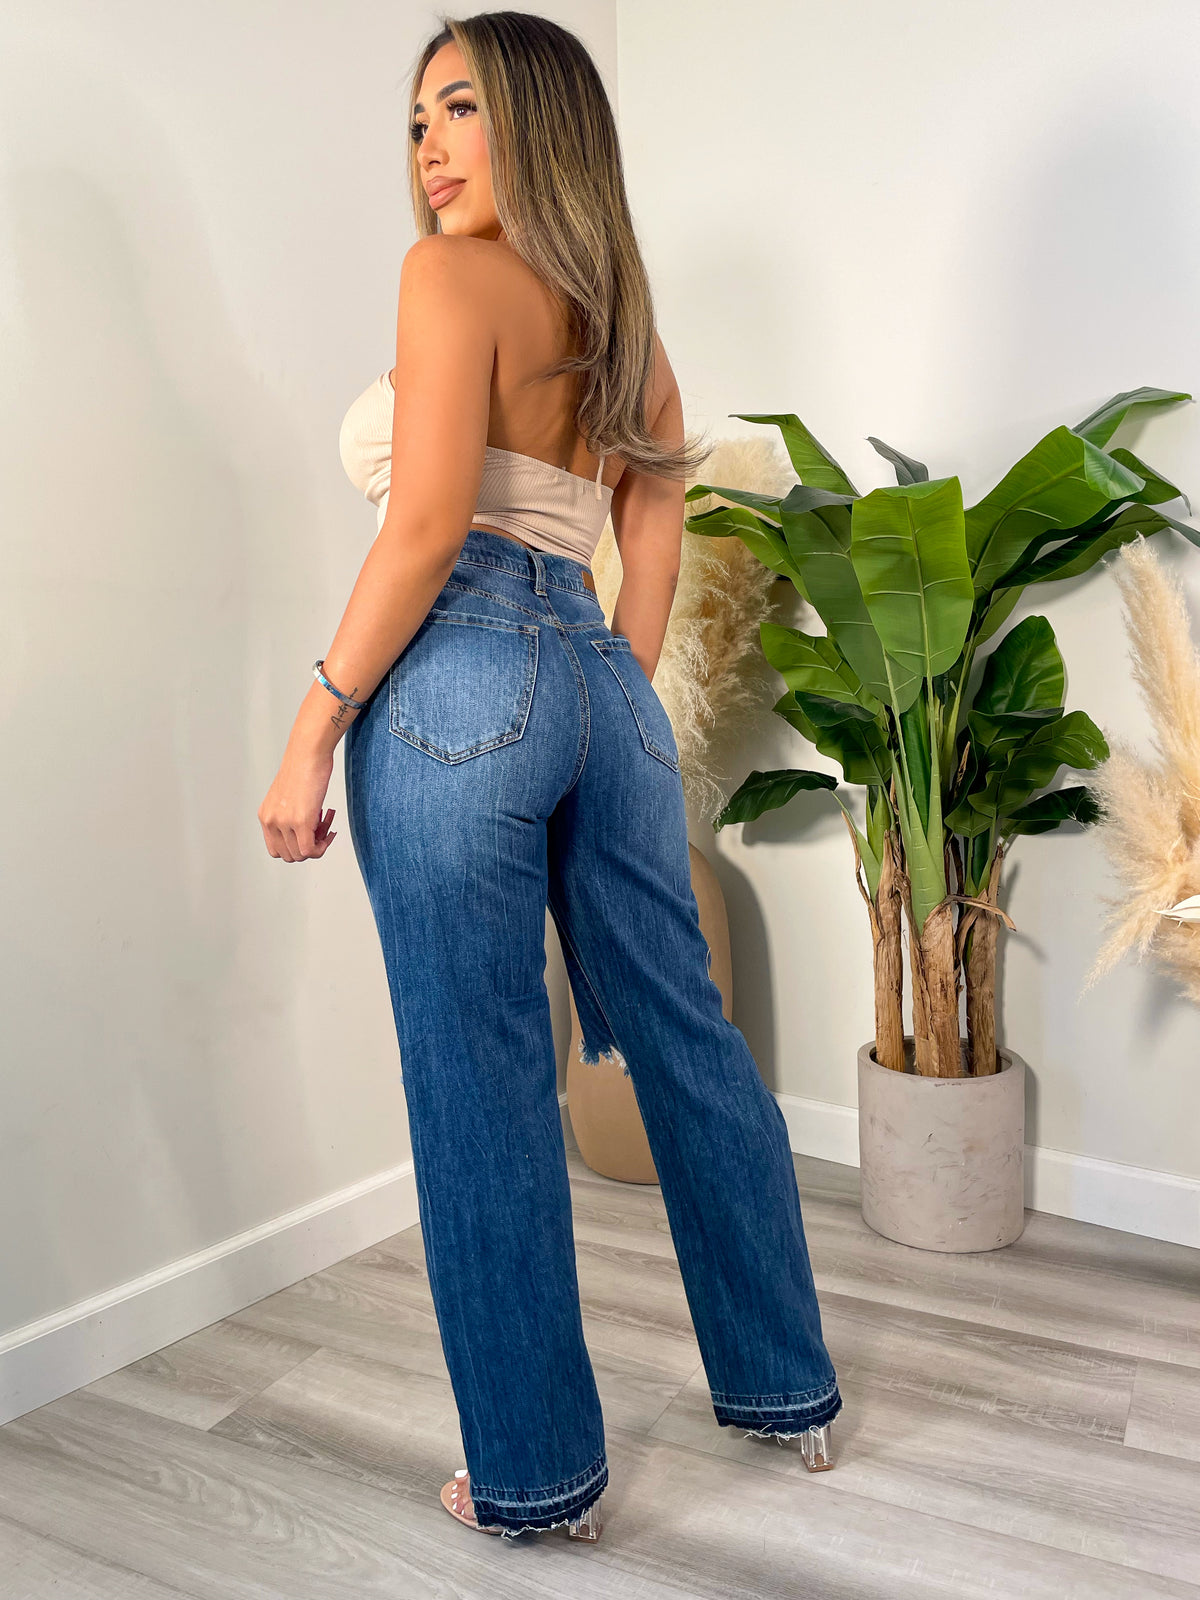 medium wash jeans, high waisted, knee rips, distressed jeans, 2 front/back pockets 